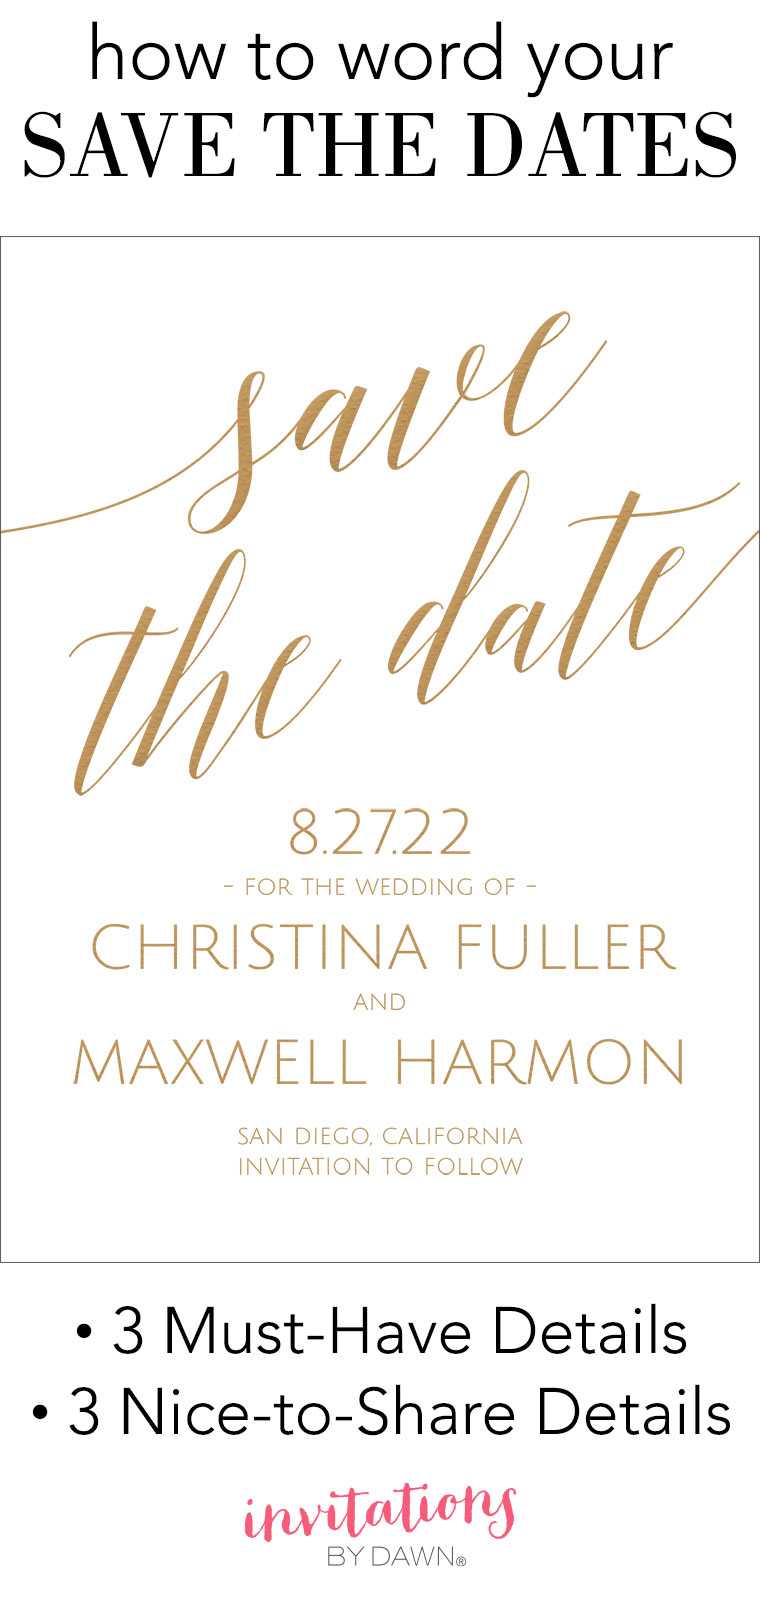 Save The Date Wording | Invitationsdawn Inside Save The Date Templates Word